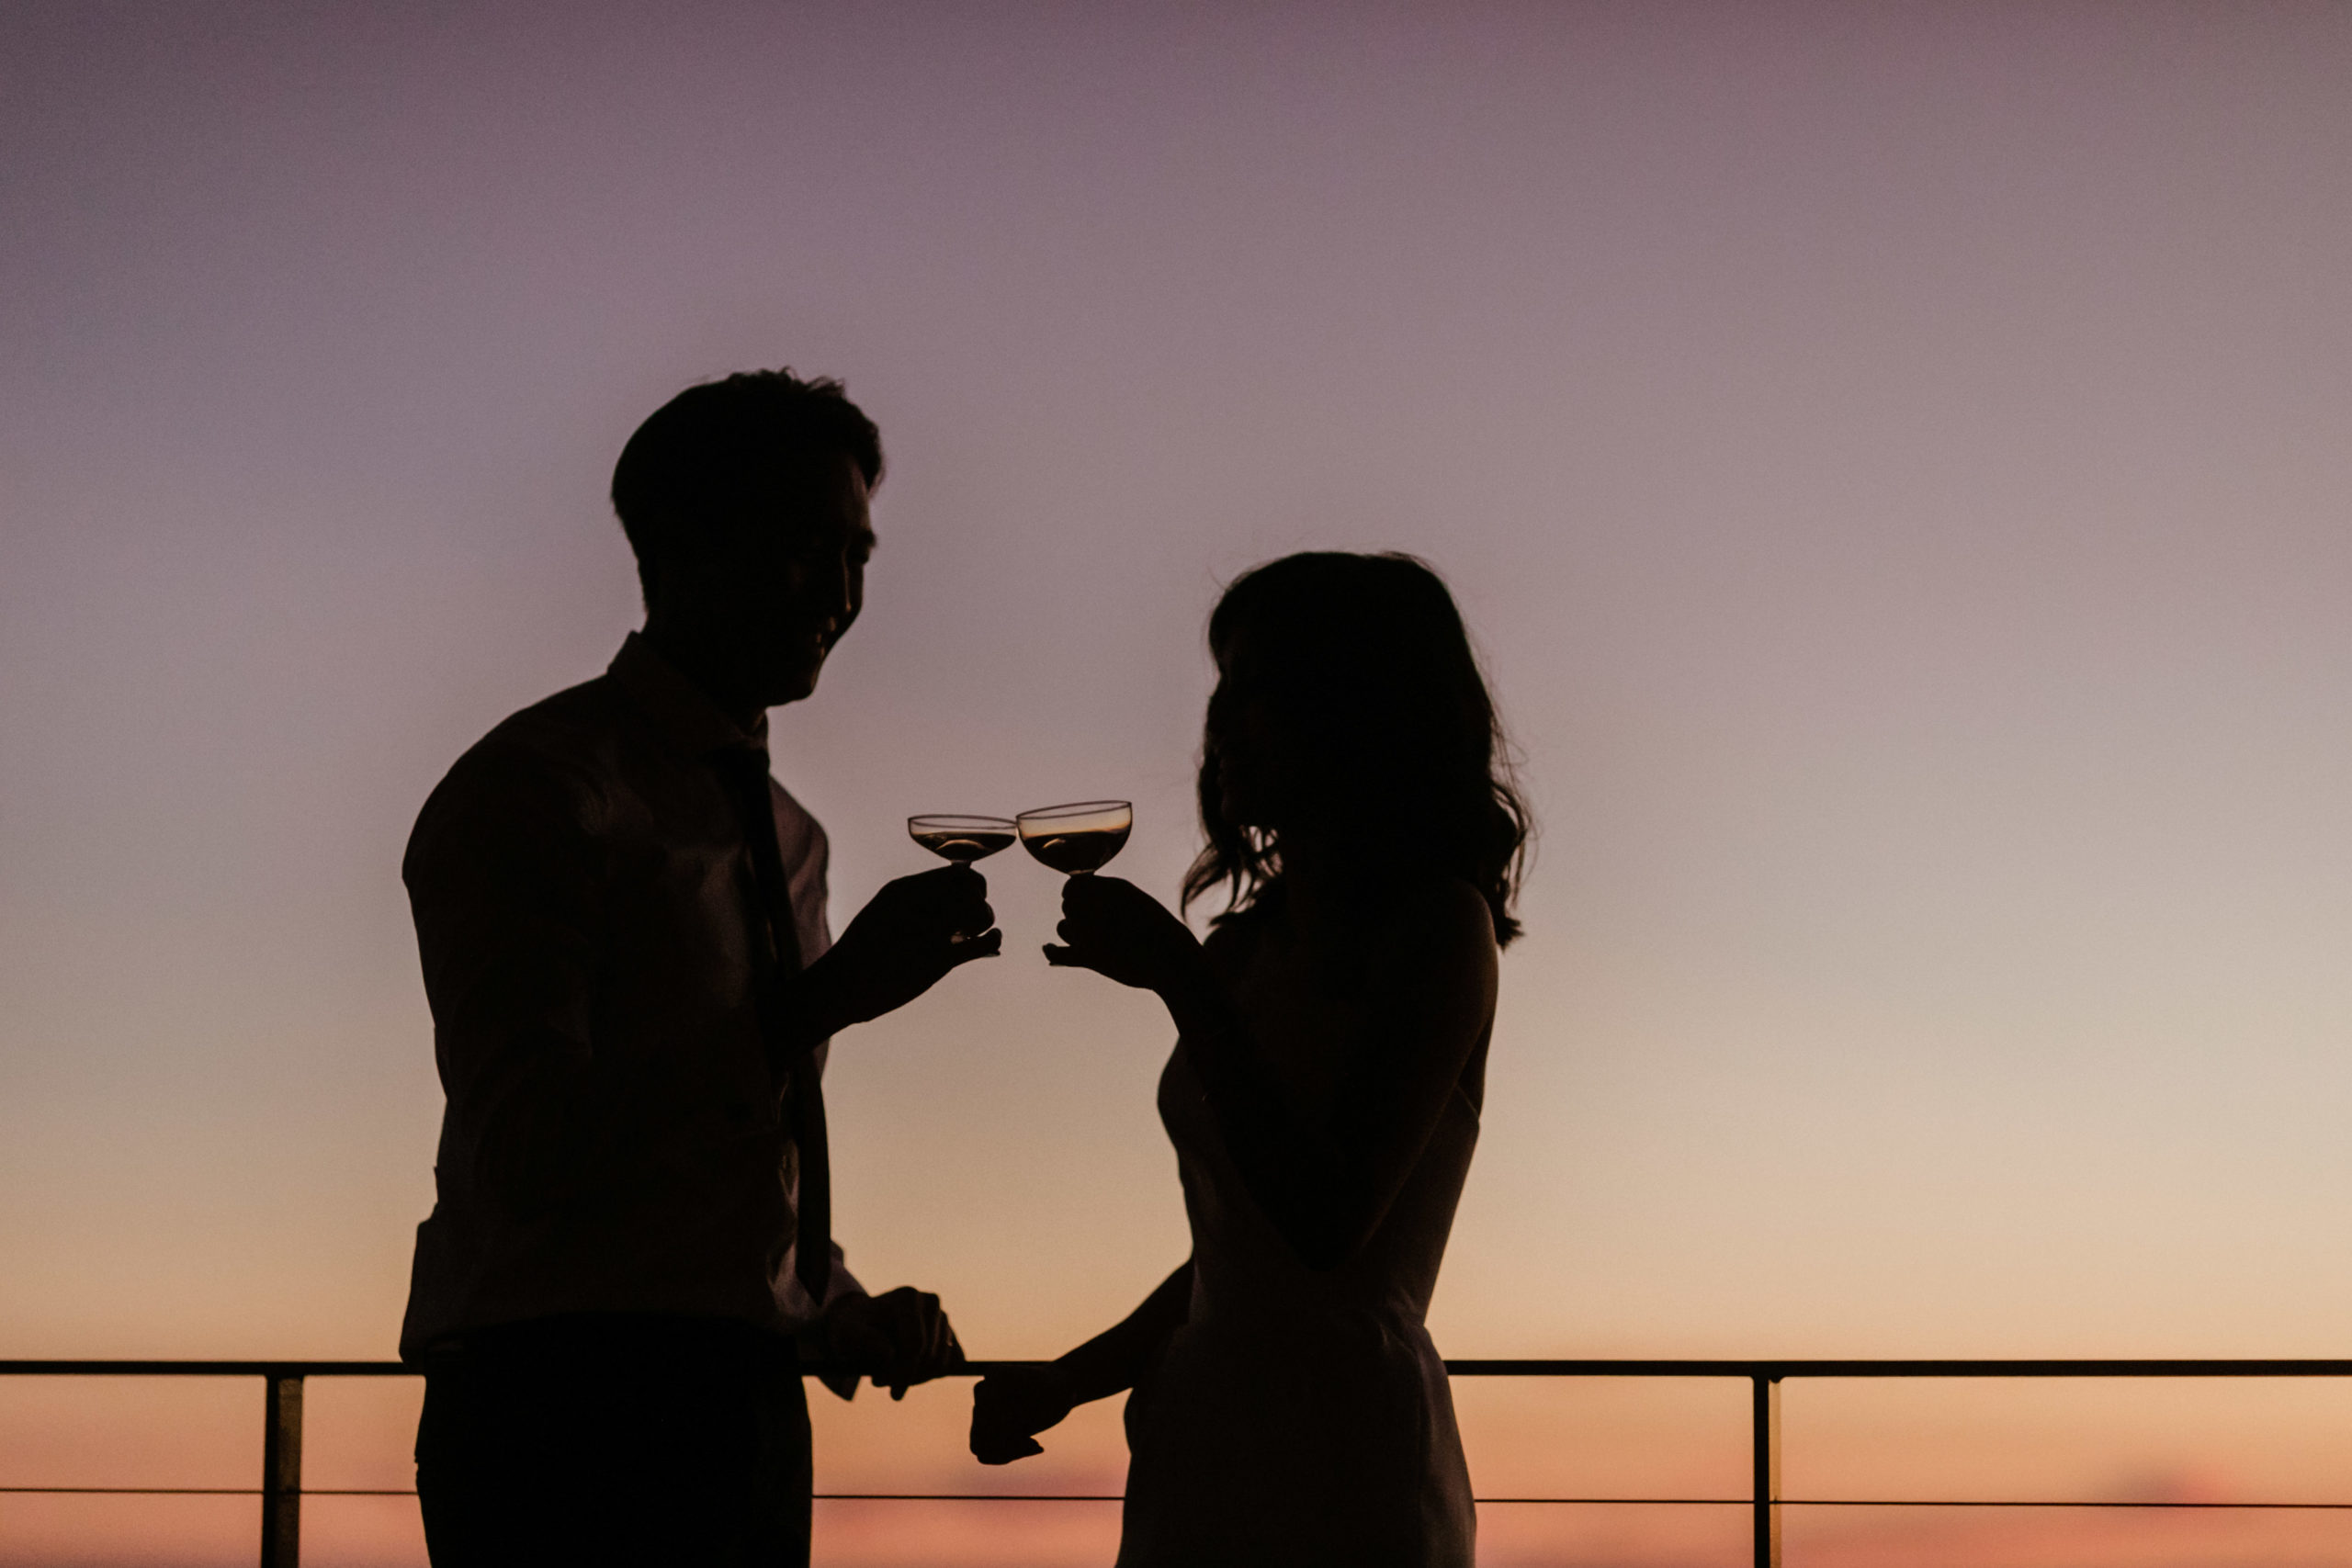 bride and groom pose together with their drinks in hand and sunset in the background